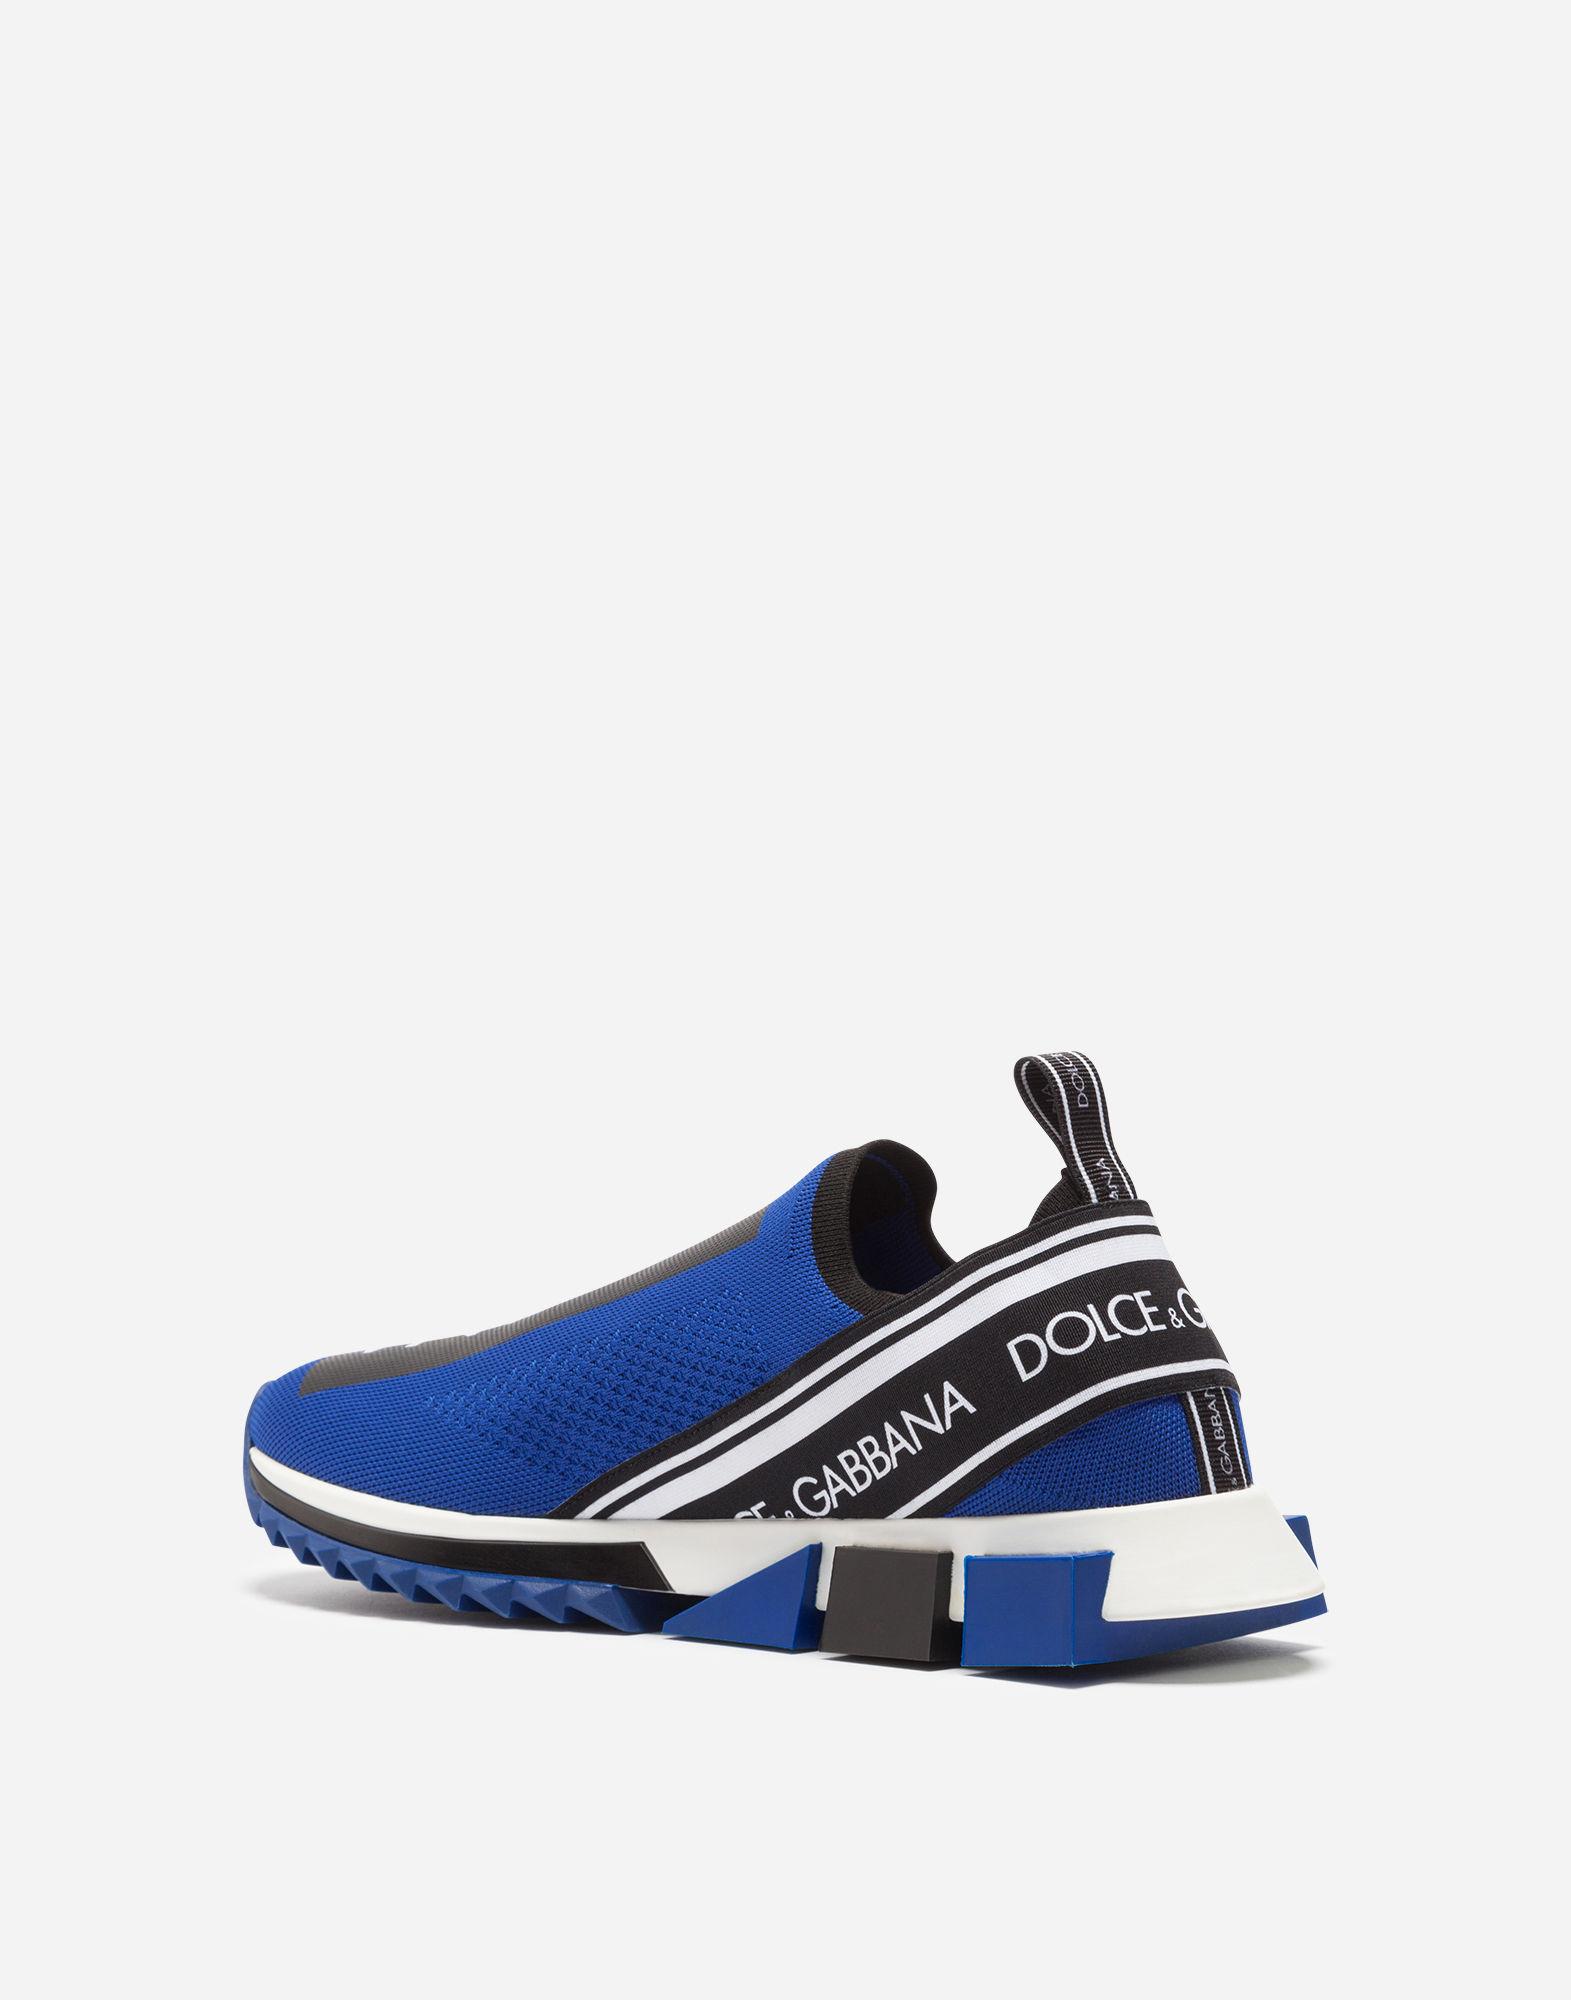 Dolce & Gabbana Synthetic Branded Sorrento Sneakers in Blue for Men - Lyst